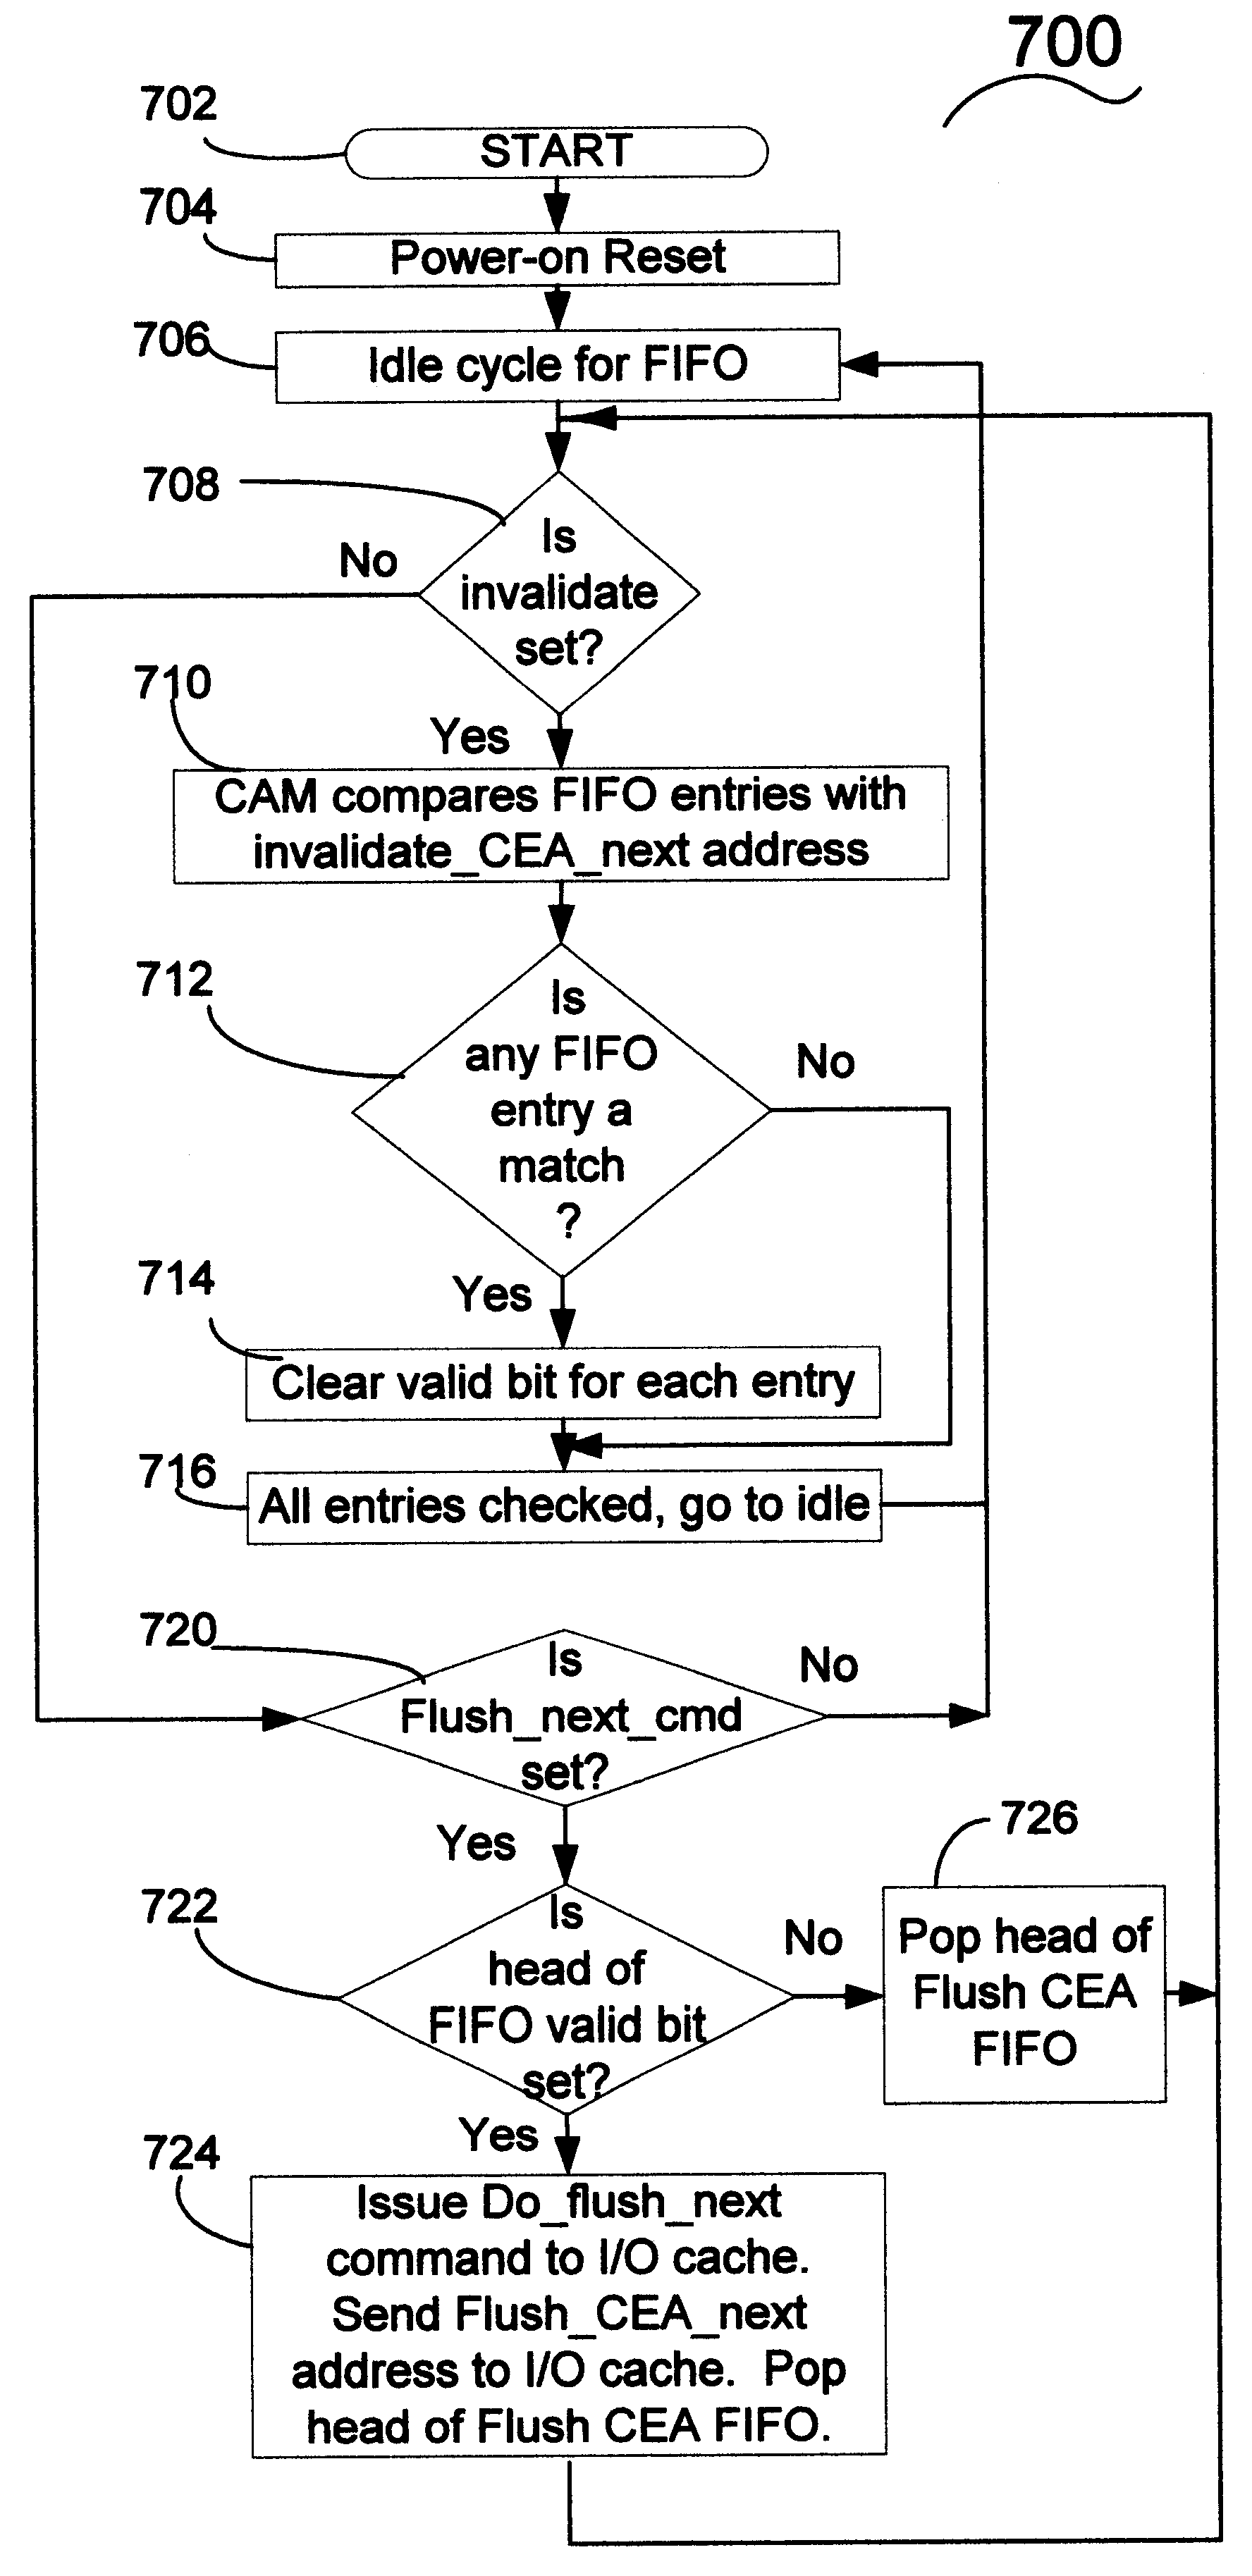 Apparatus and method for tracking flushes of cache entries in a data processing system